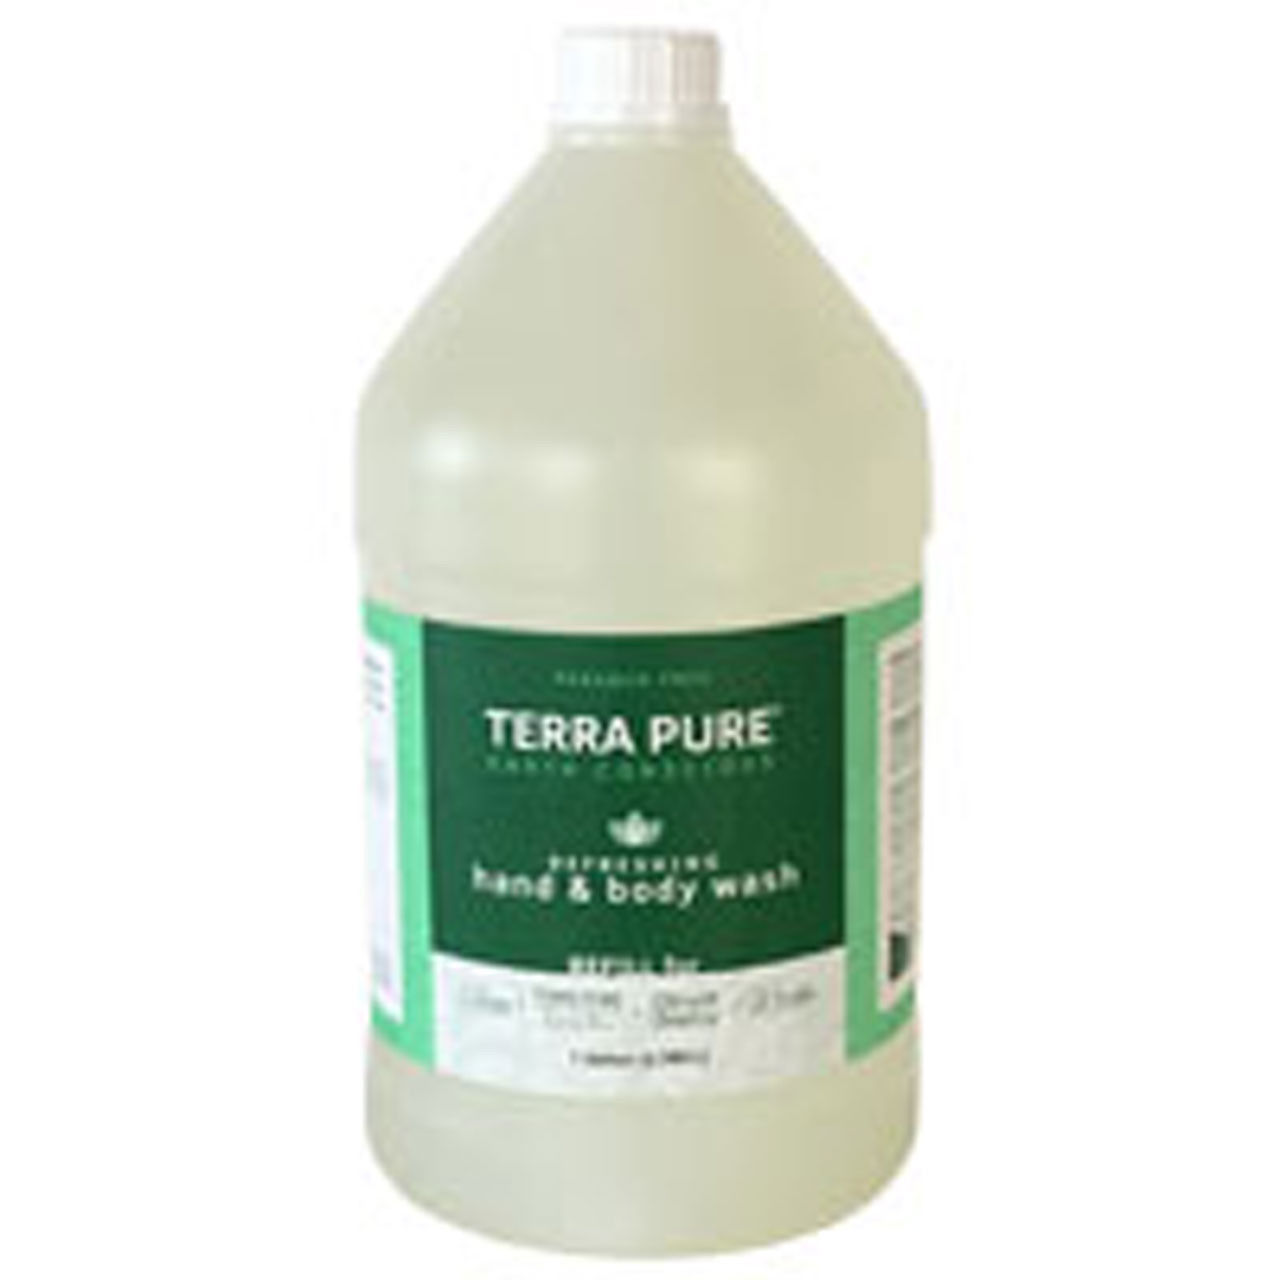 What formulas does the TERRA PURE GREEN TEA BULK product use?